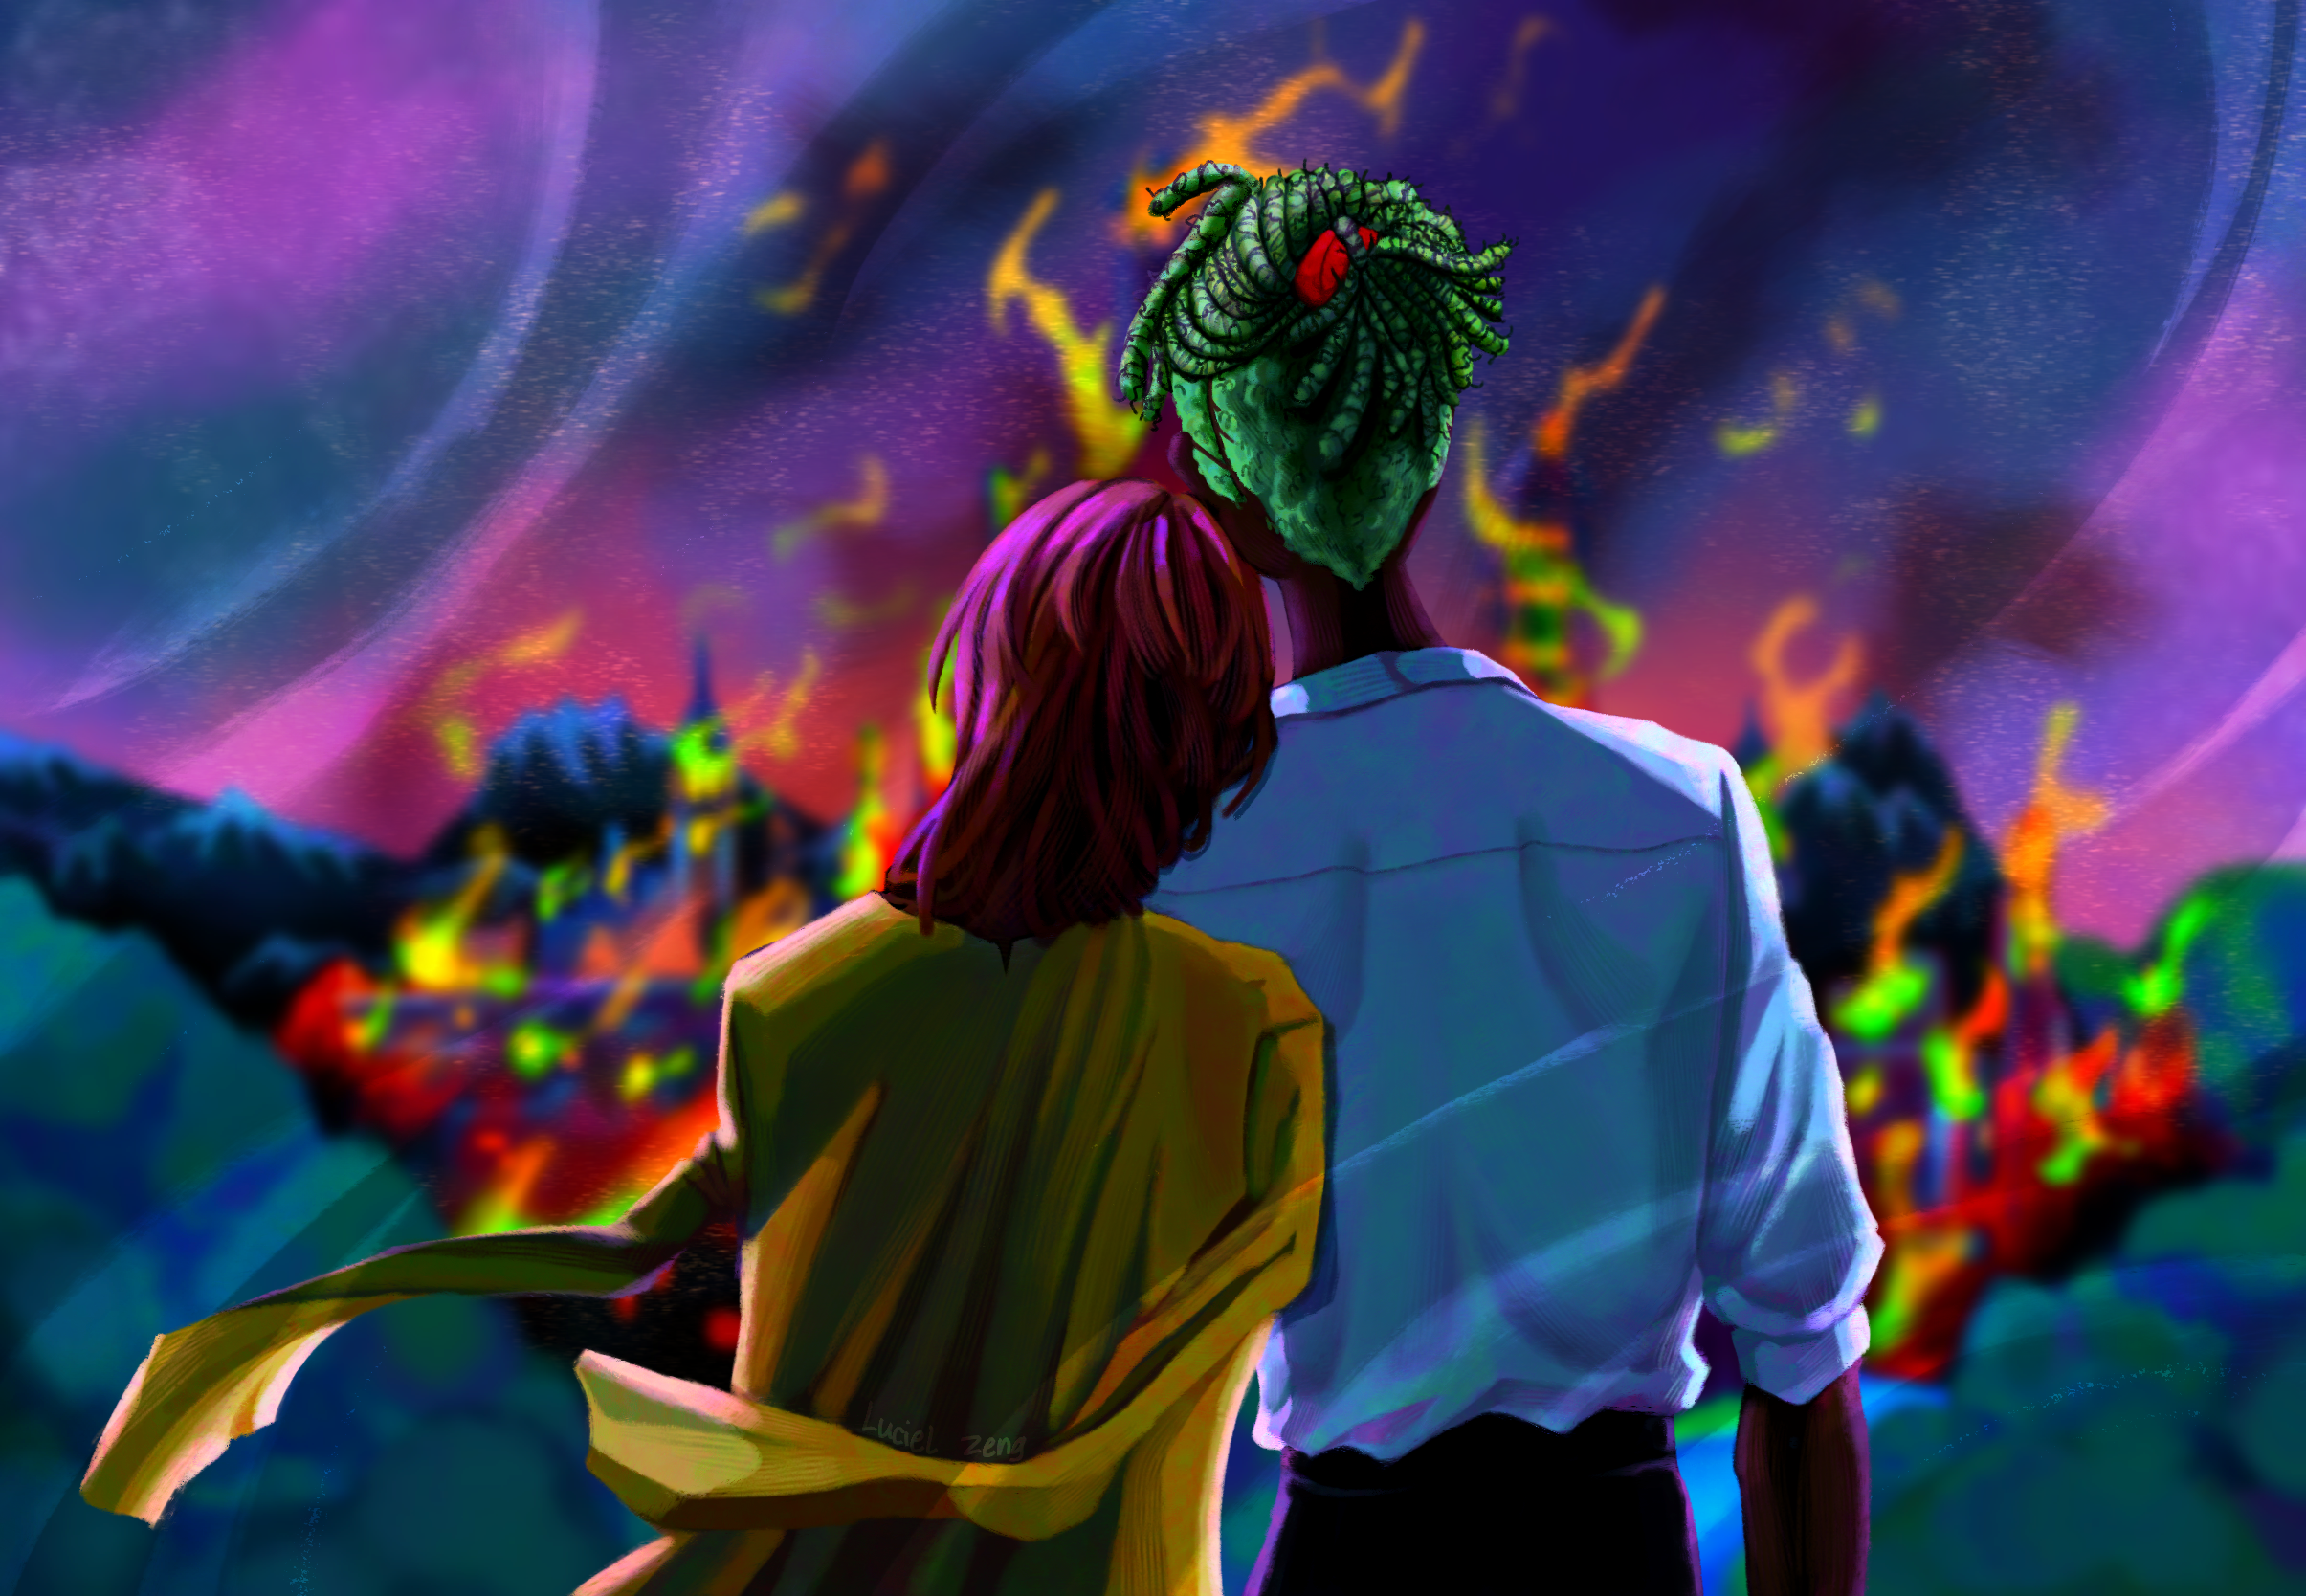 A computer illustration of two people watching a fire.